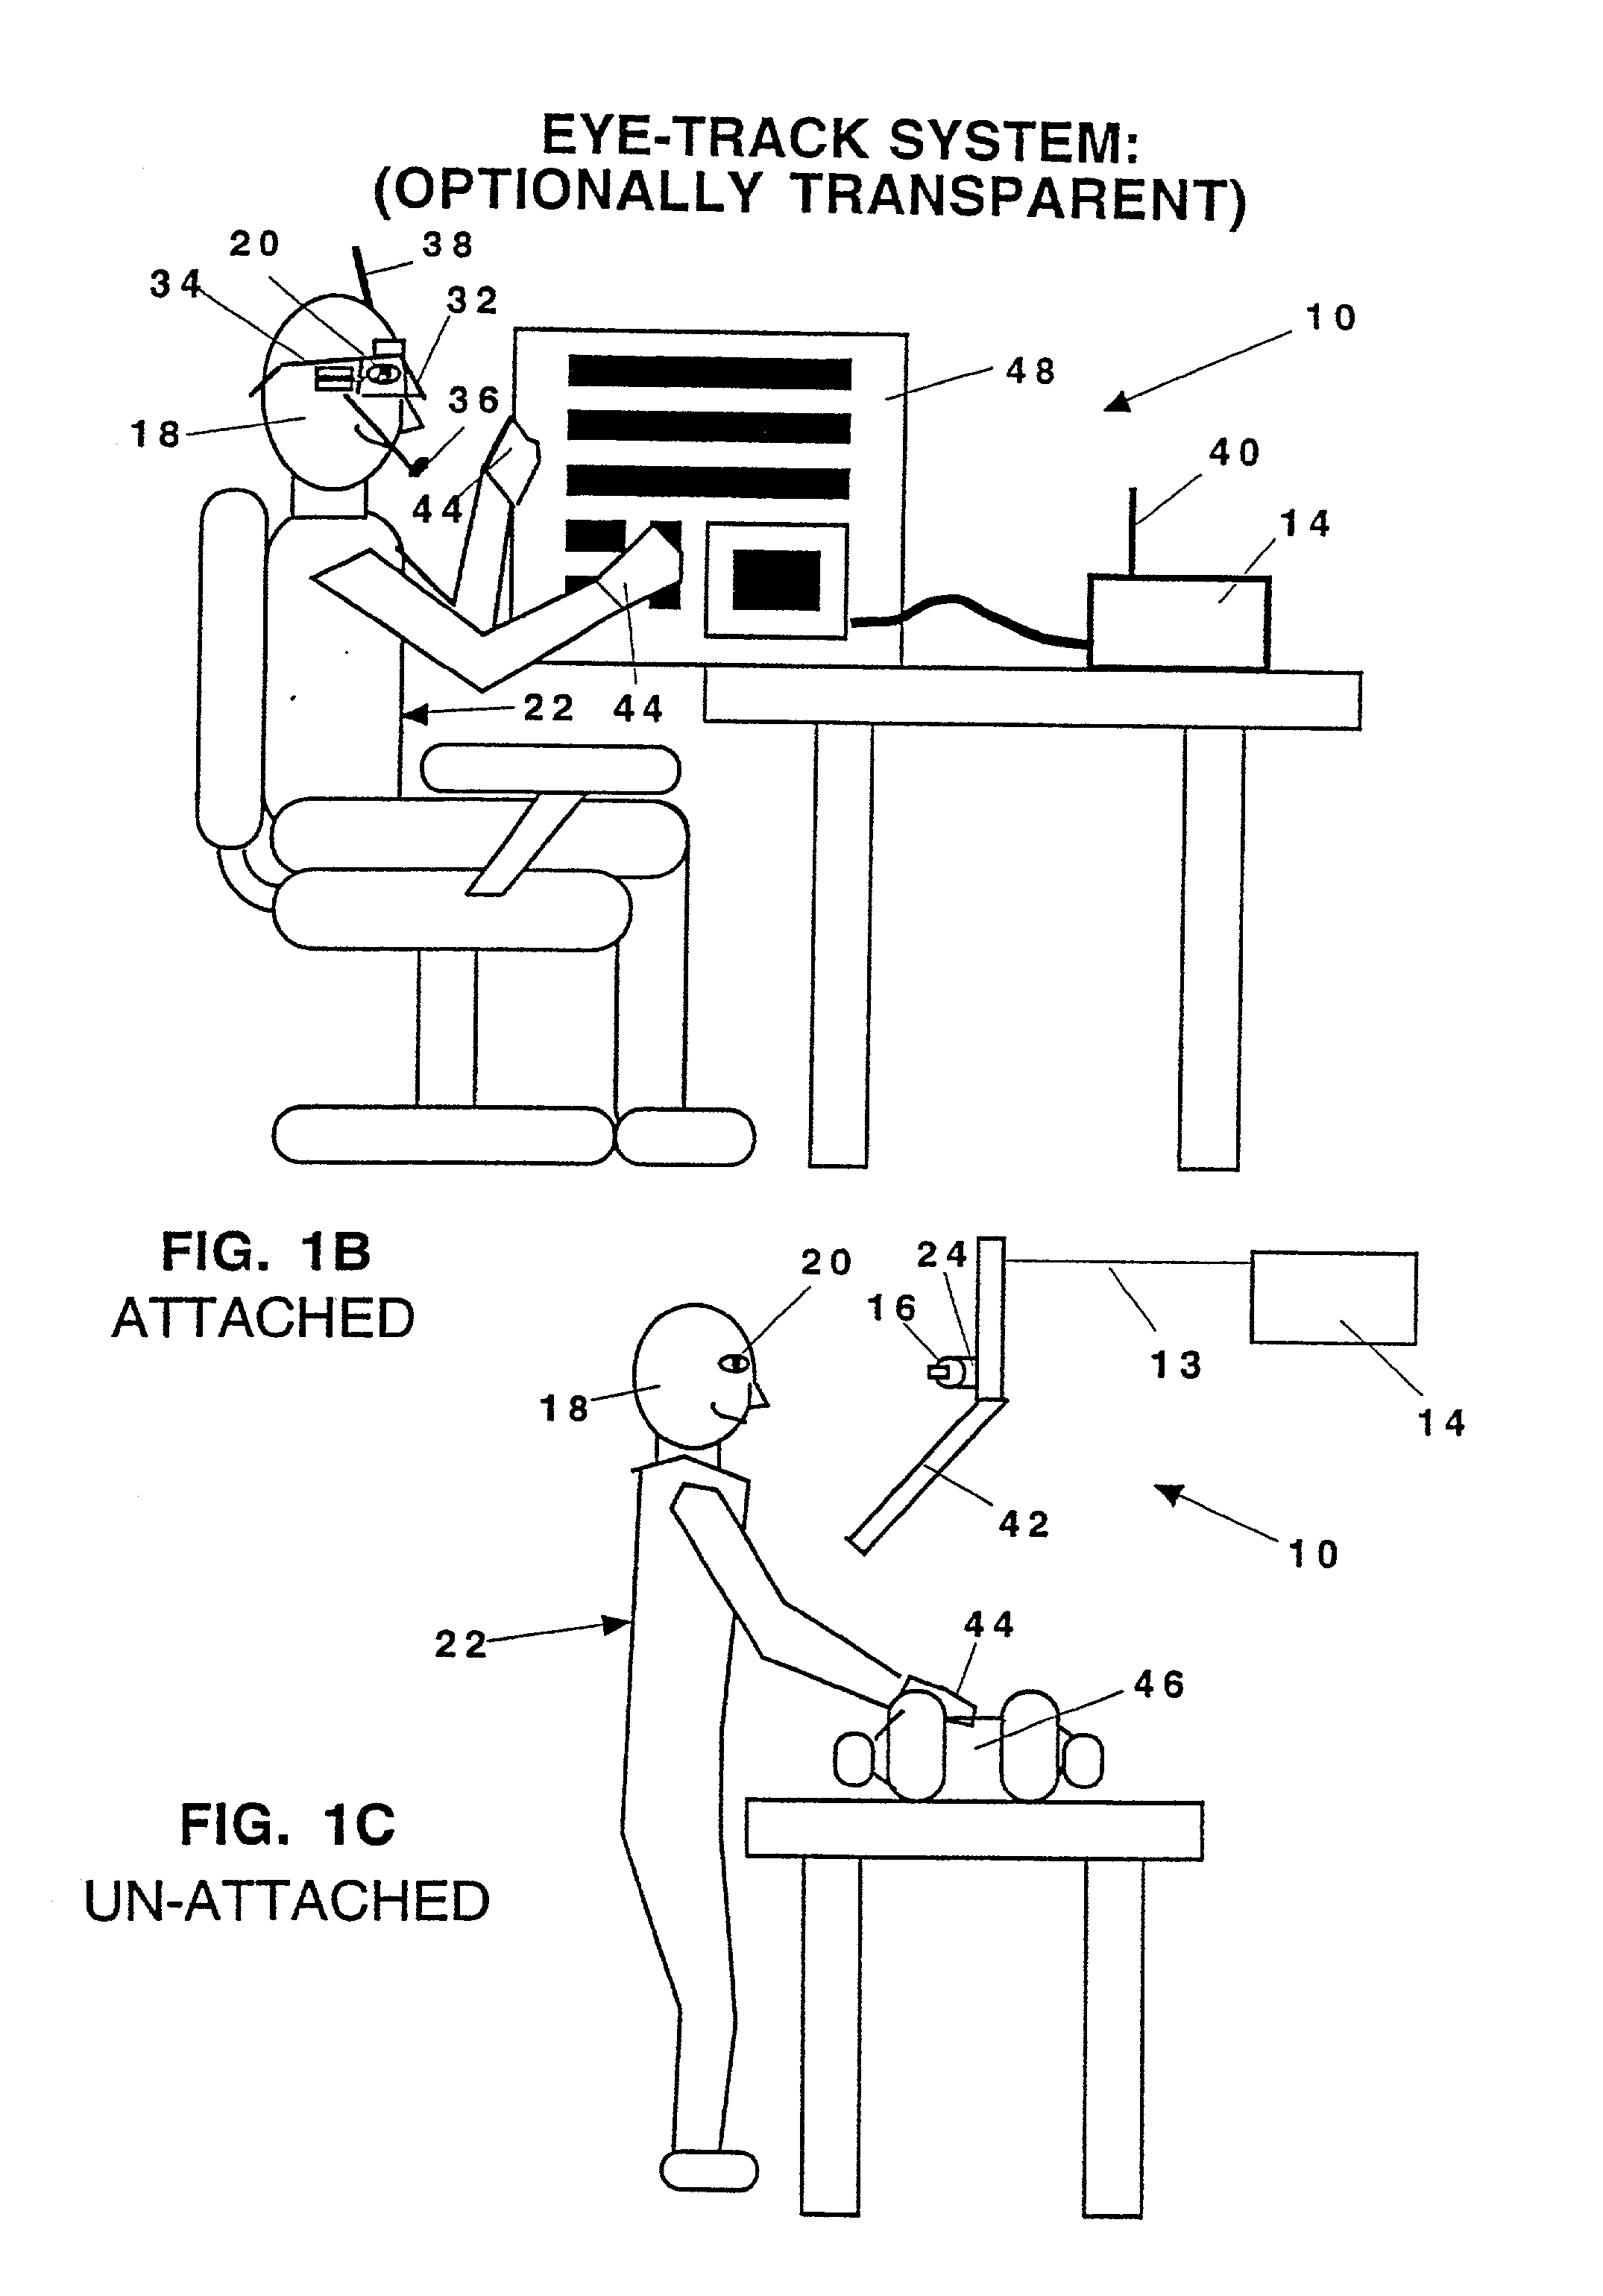 System and methods for controlling automatic scrolling of information on a display or screen